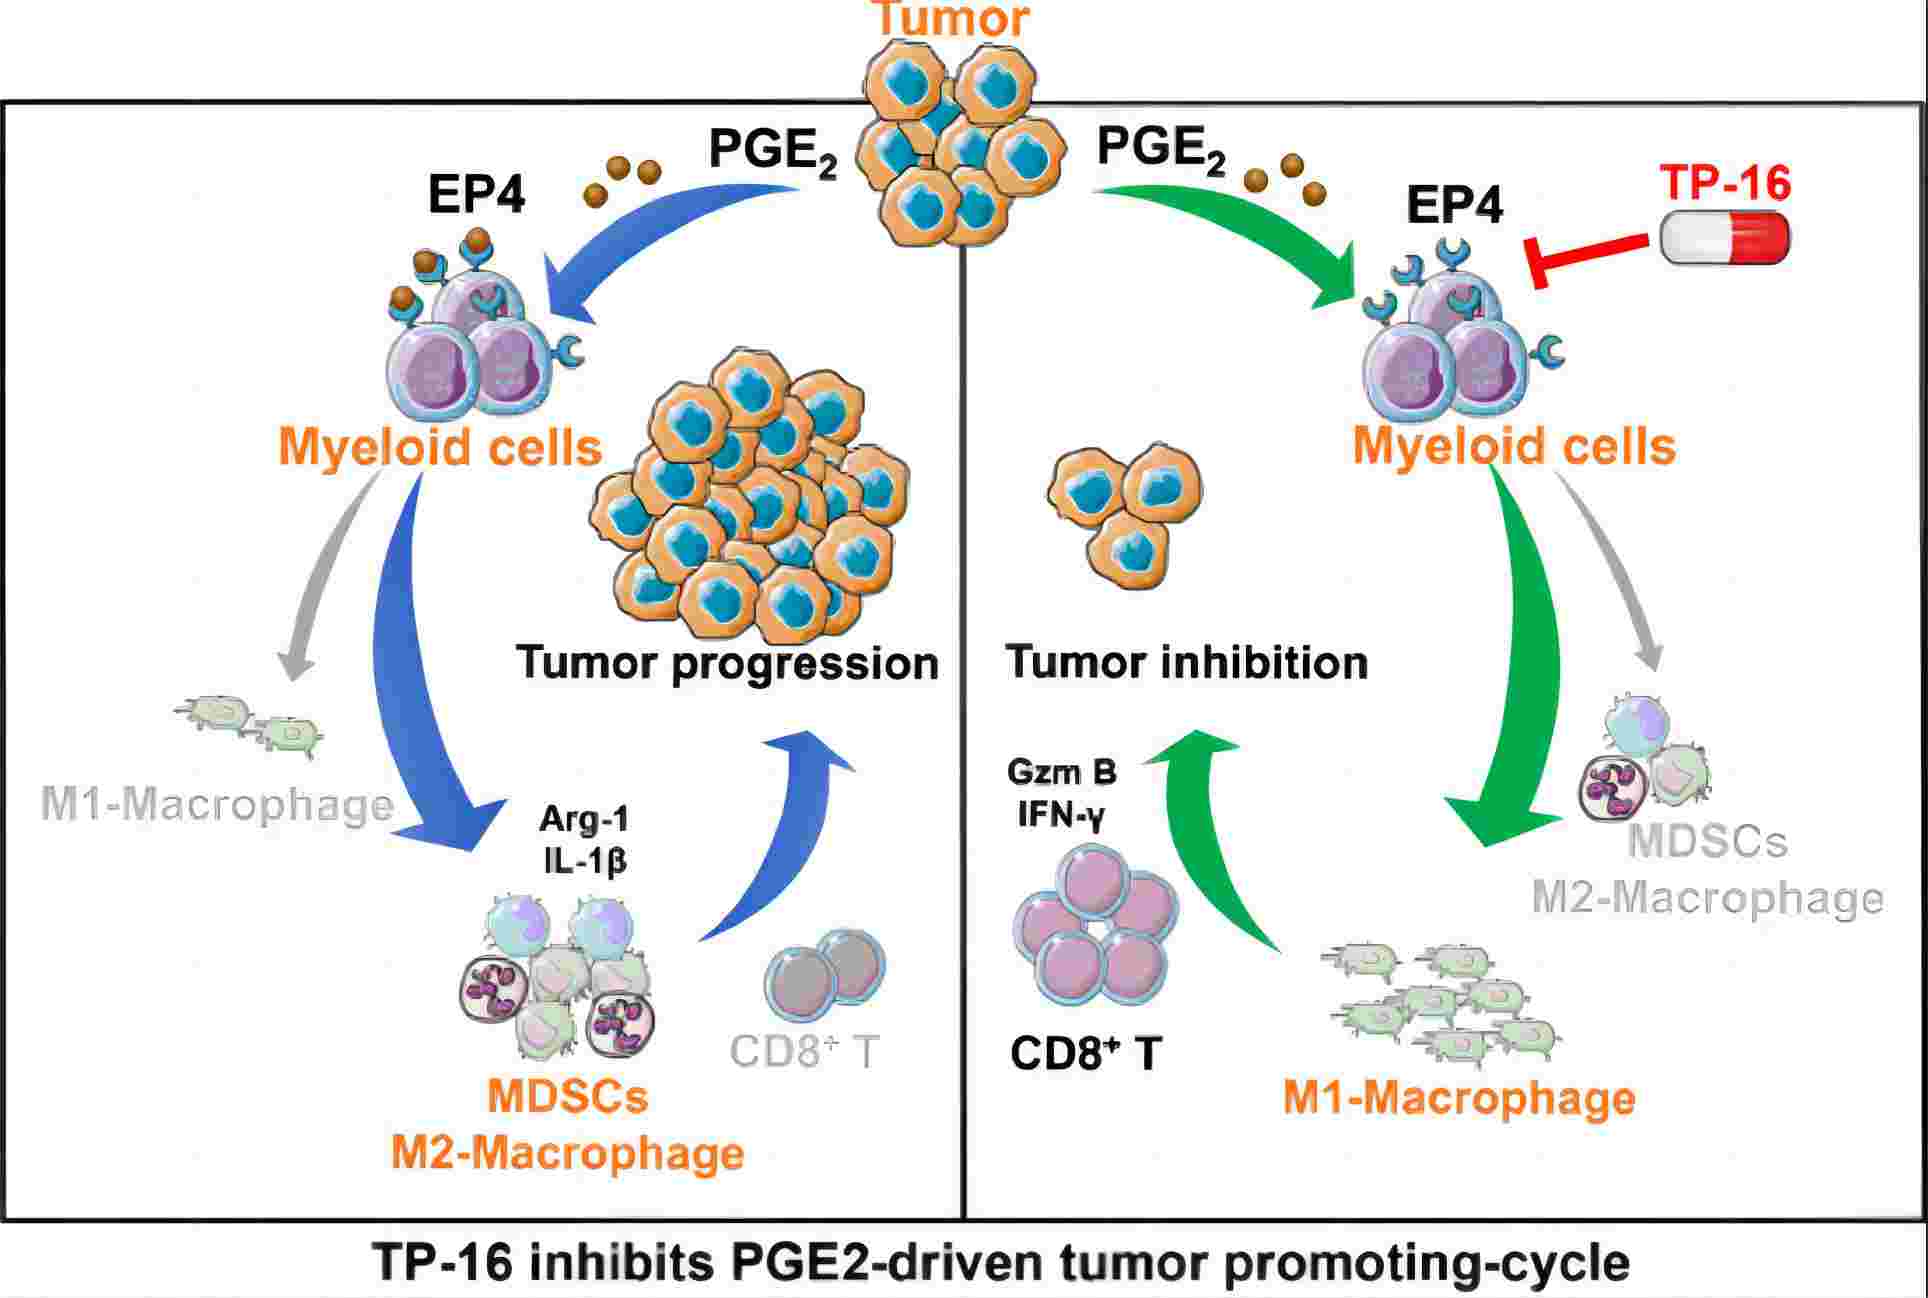 Enhancing colorectal cancer immunotherapy through reprogramming of IMCs. (Lu, et al., 2021)